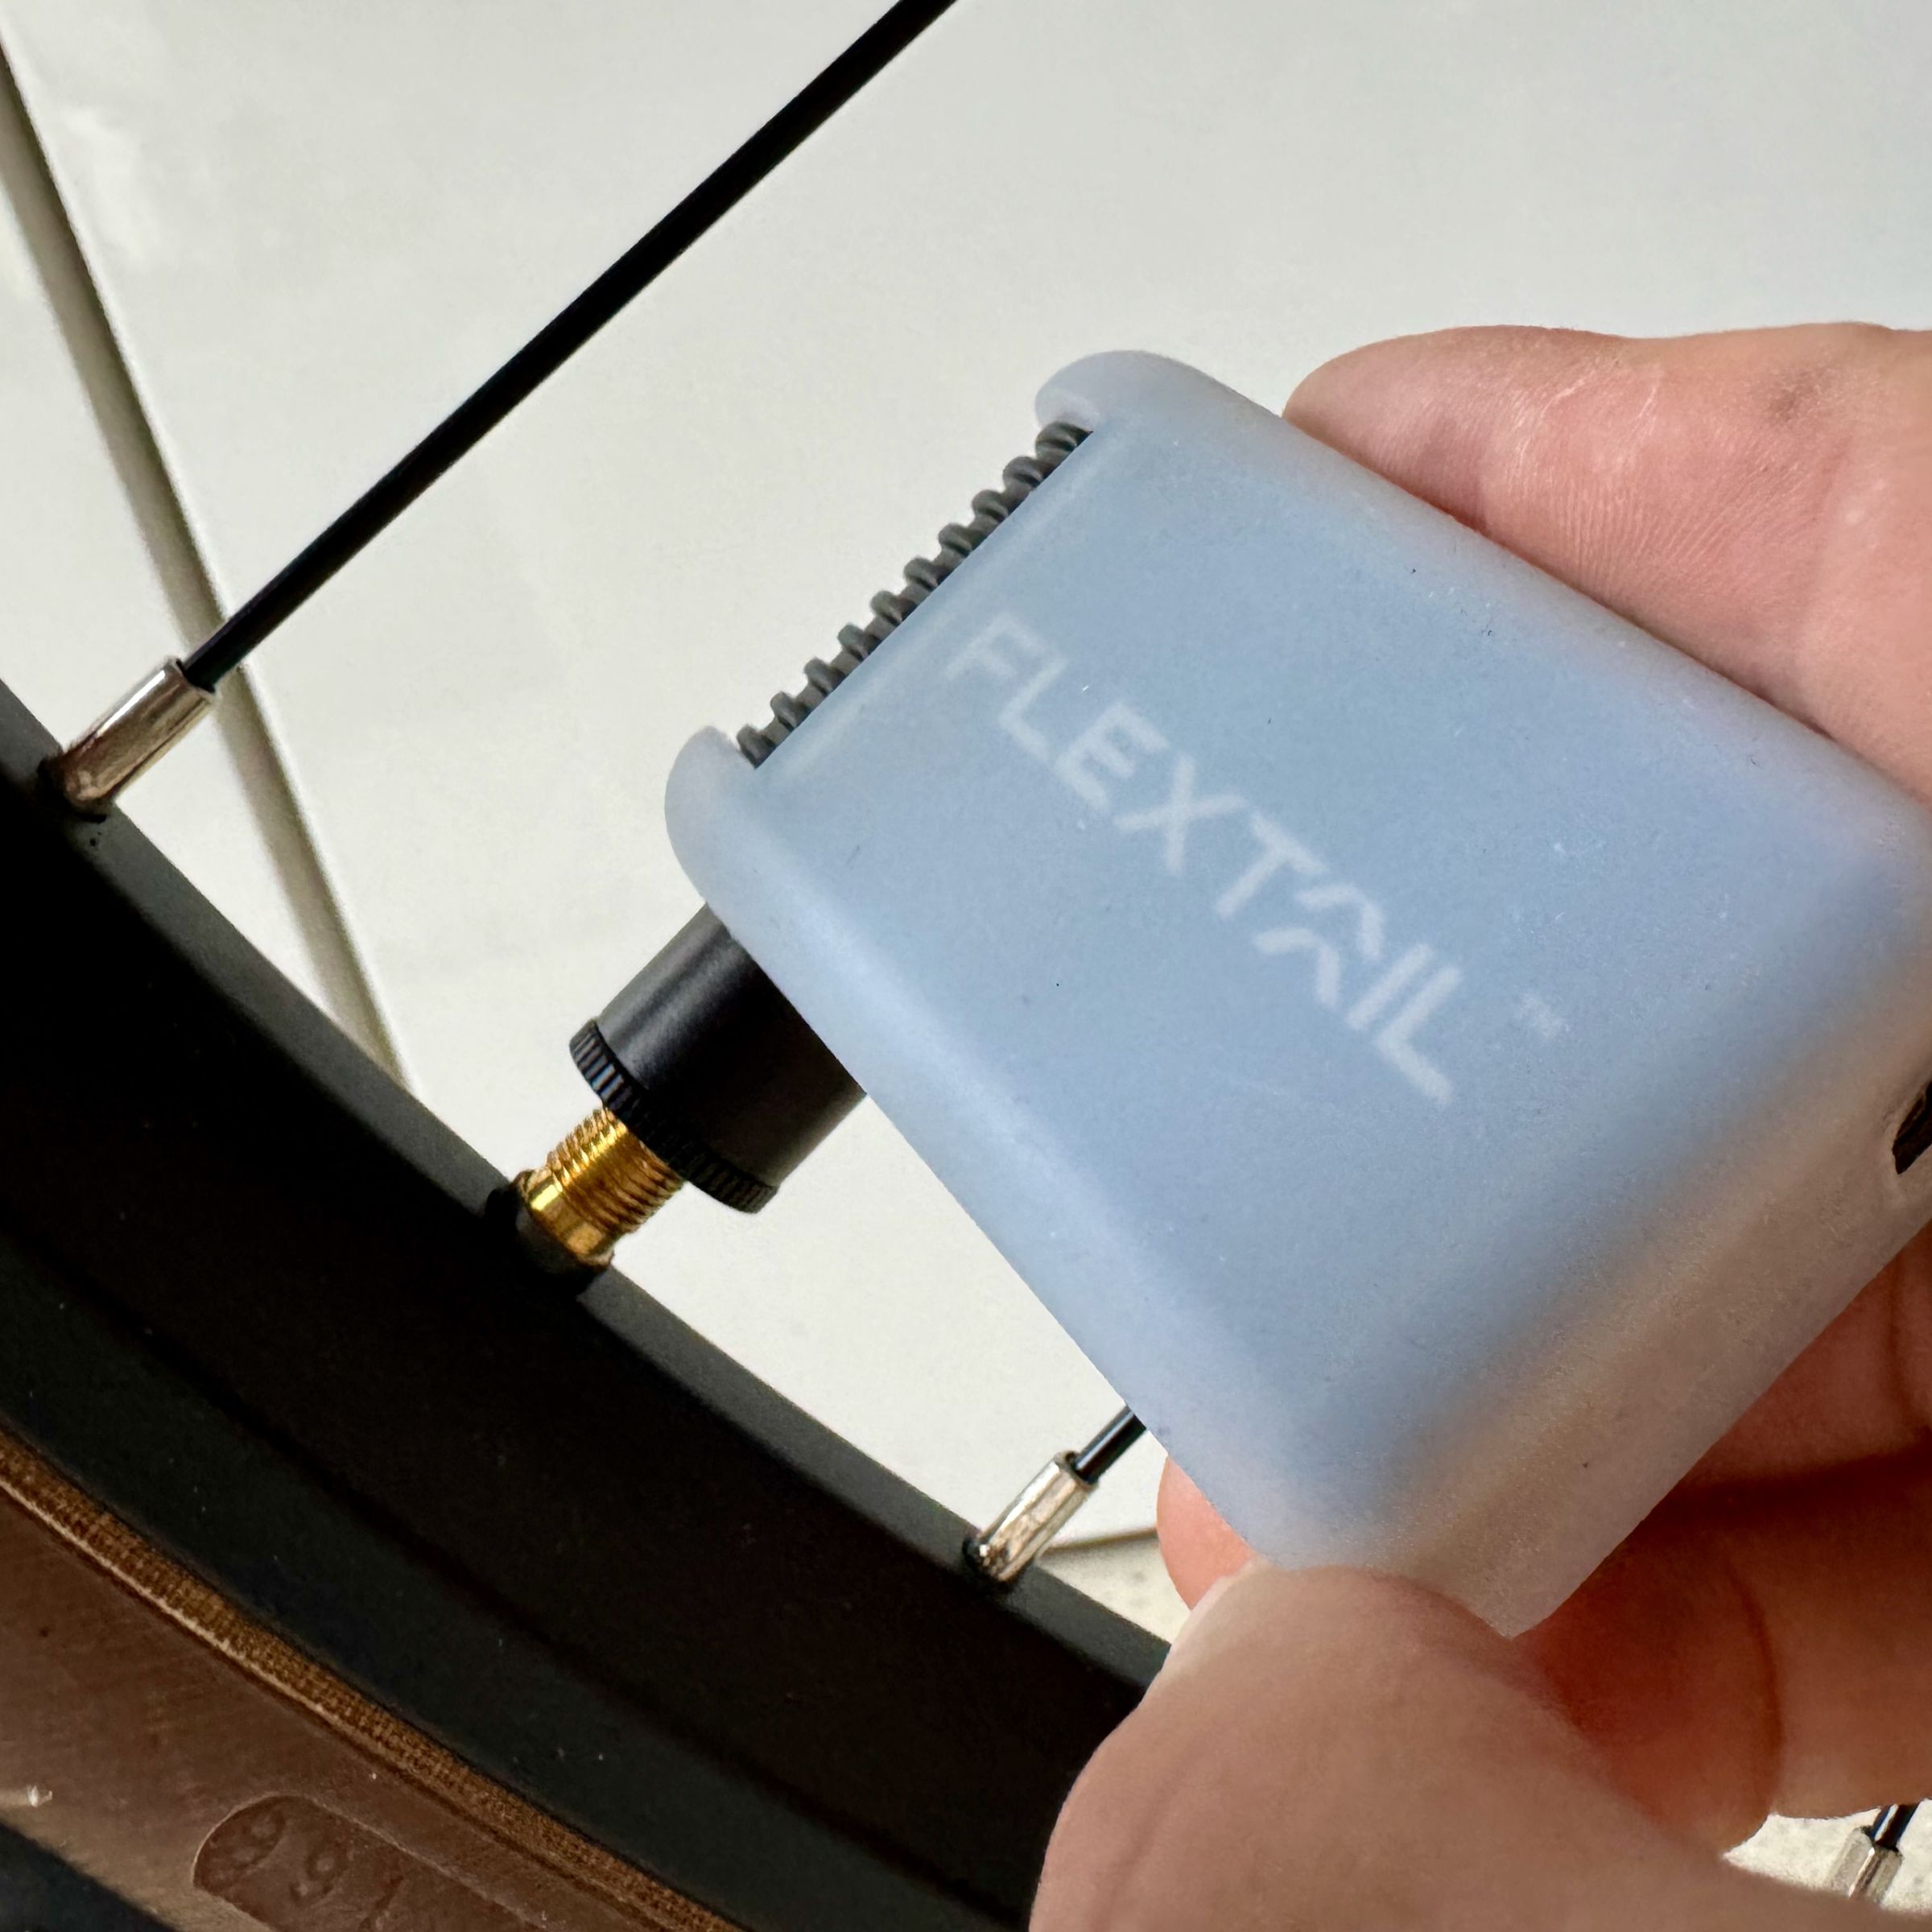 The tiny Flextail pump inflated this city bike tire in 45 seconds.